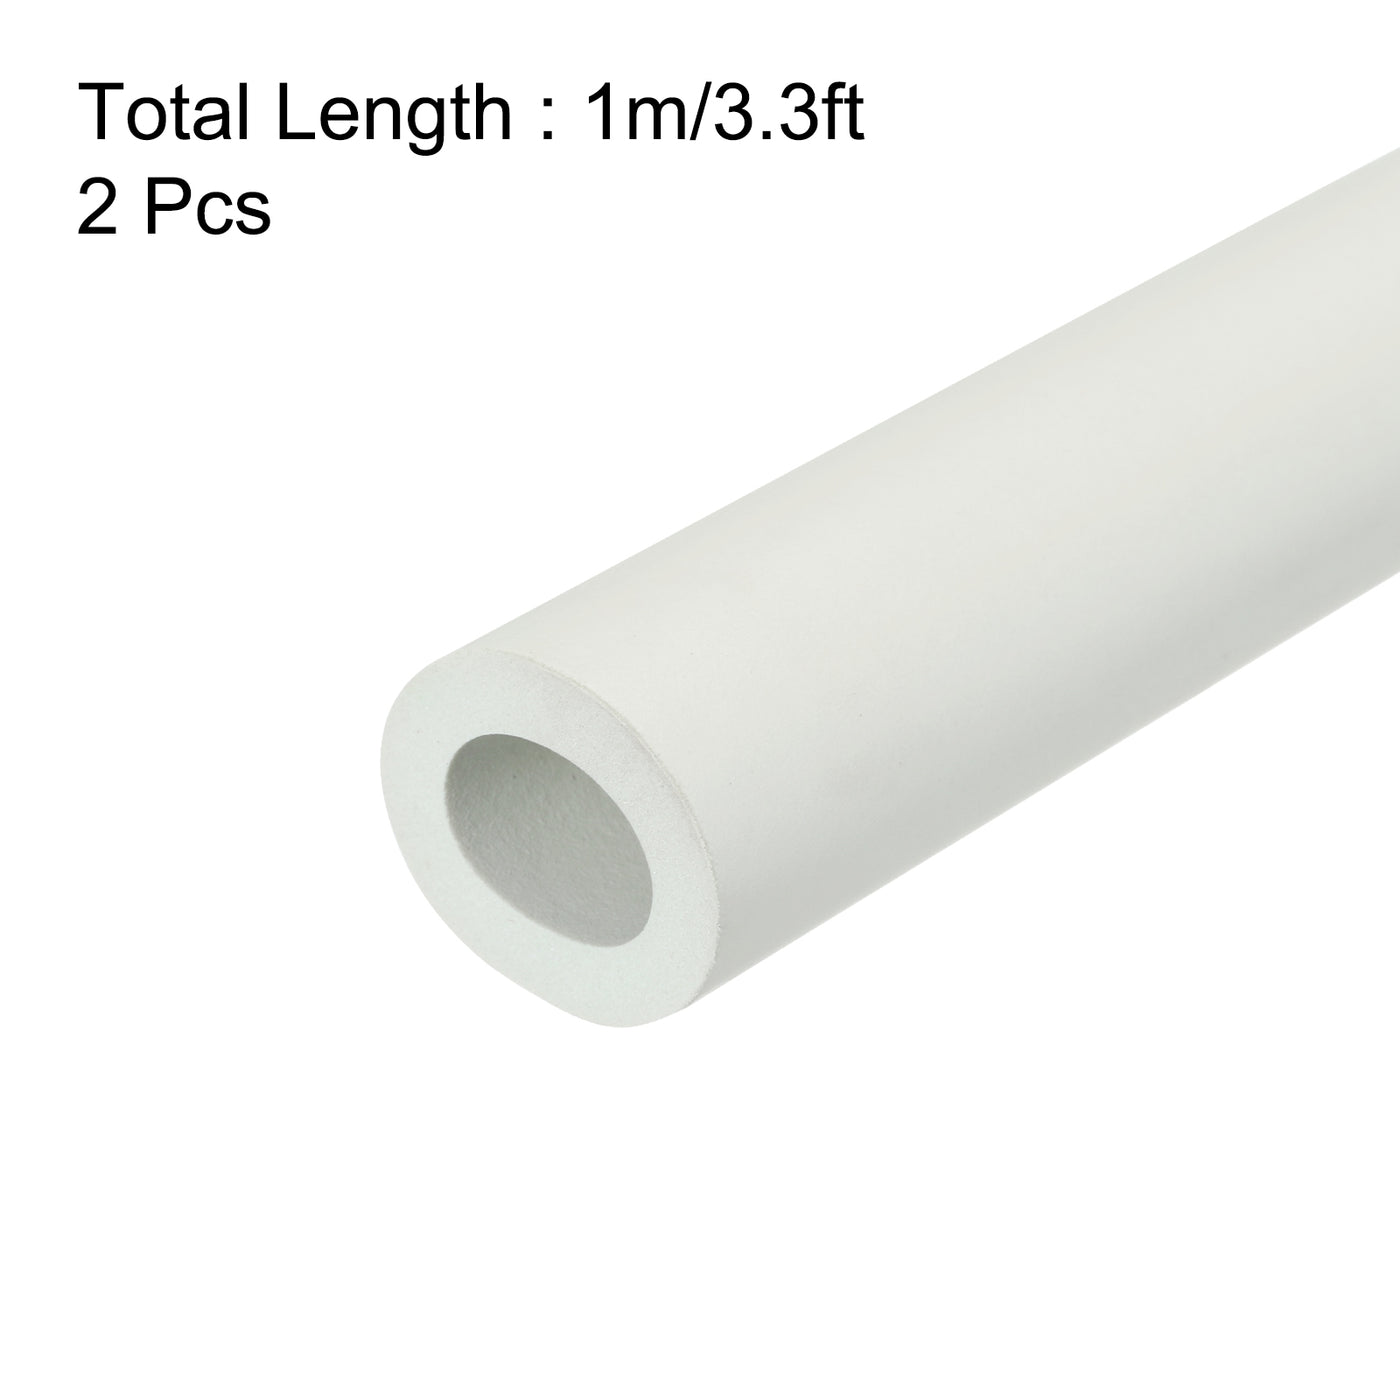 uxcell Uxcell 2pcs 3.3ft Pipe Insulation Tube 18mm ID 30mm OD Foam Tubing for Handle Grip Support, Beige